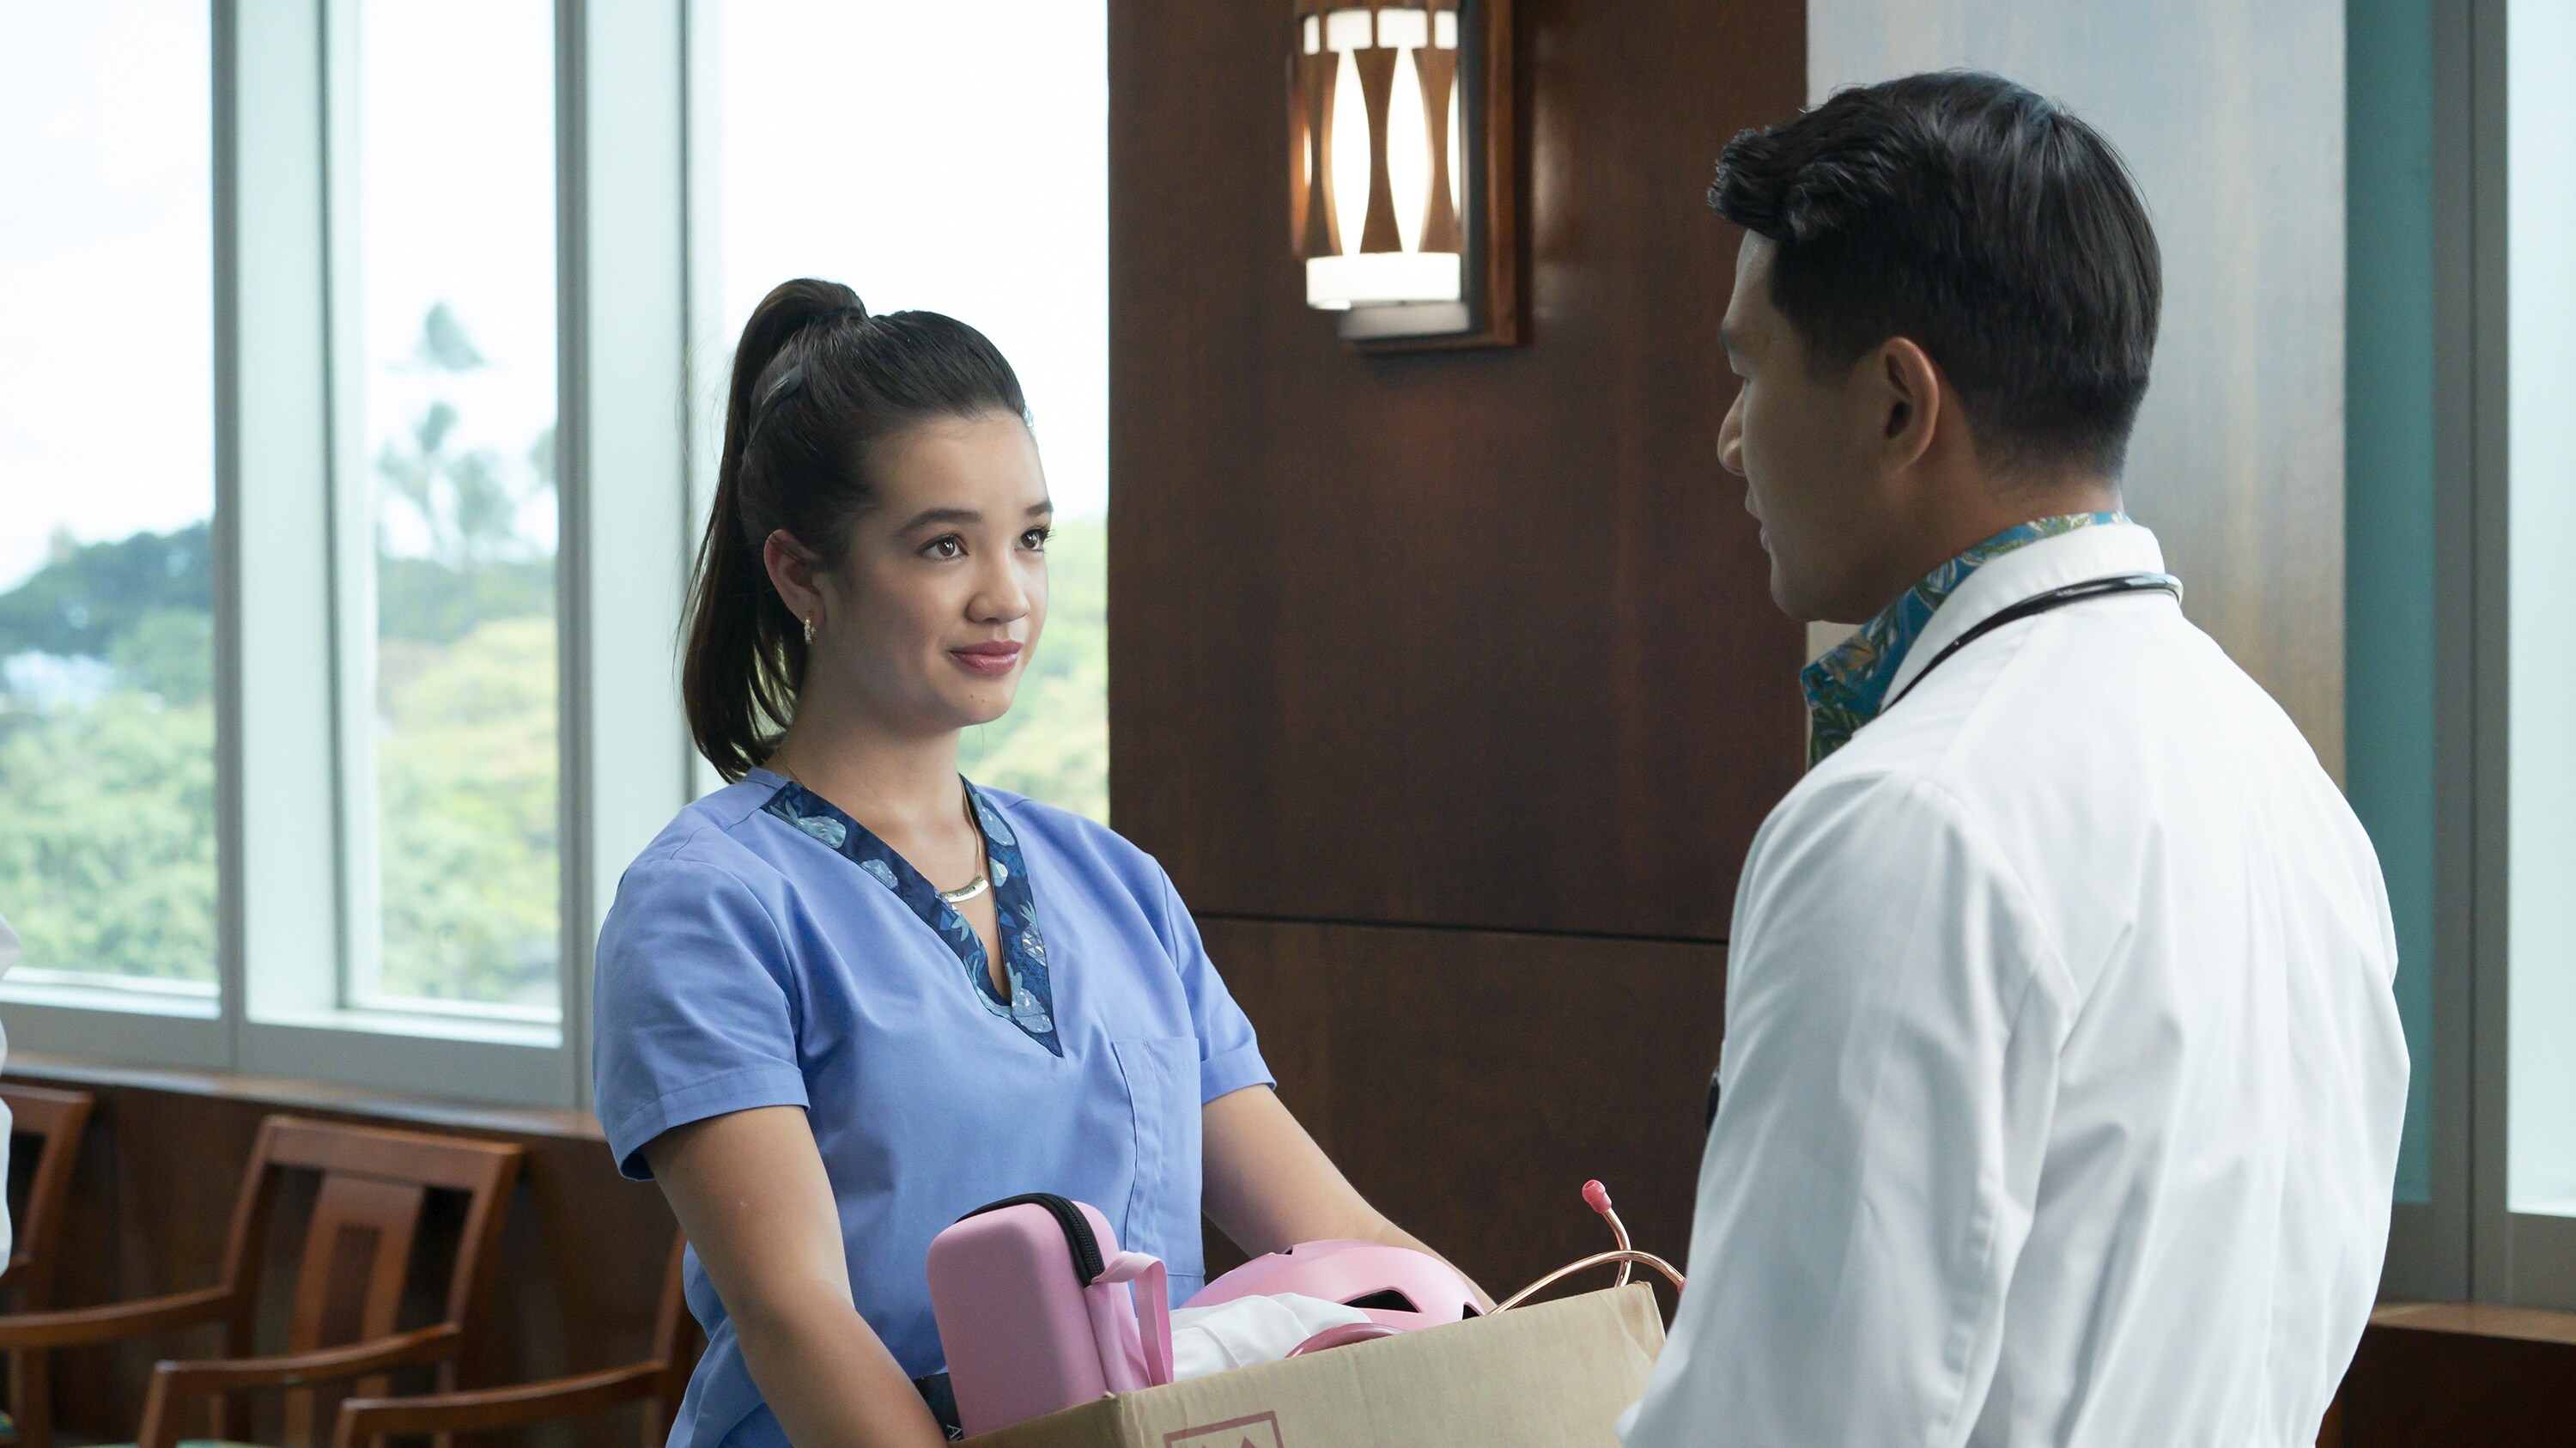 DOOGIE KAMEALOHA, M.D. - “Aloha - The Goodbye One” - Lahela is hired as a medic on Walter’s surf tour in Australia, and the Chief of Staff is announced. (Disney/Karen Neal) PEYTON ELIZABETH LEE, RONNY CHIENG